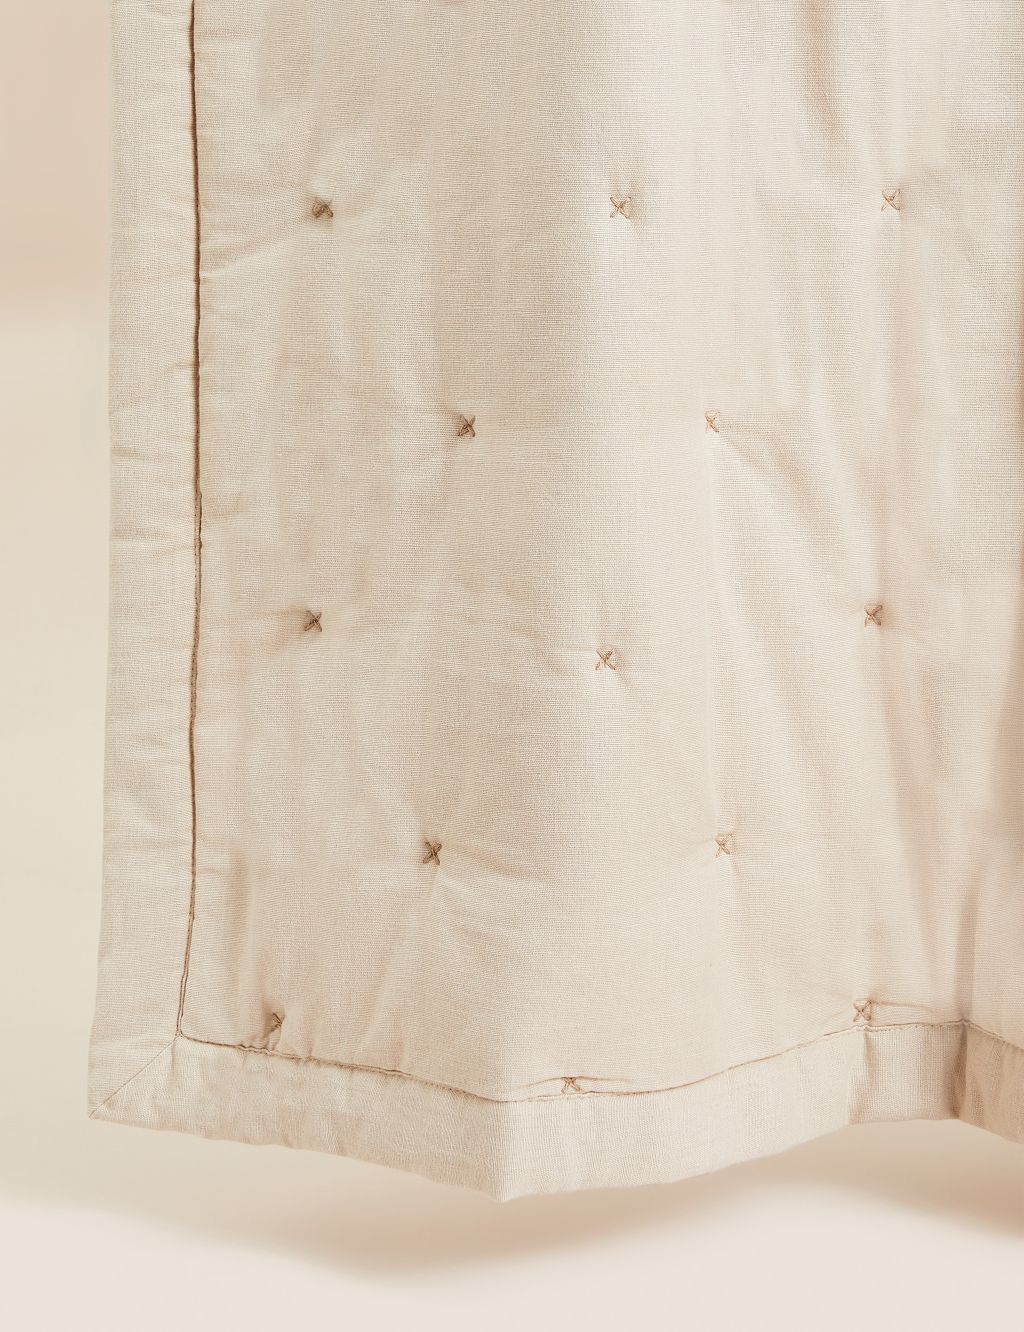 Cotton with Linen Bedspread image 2